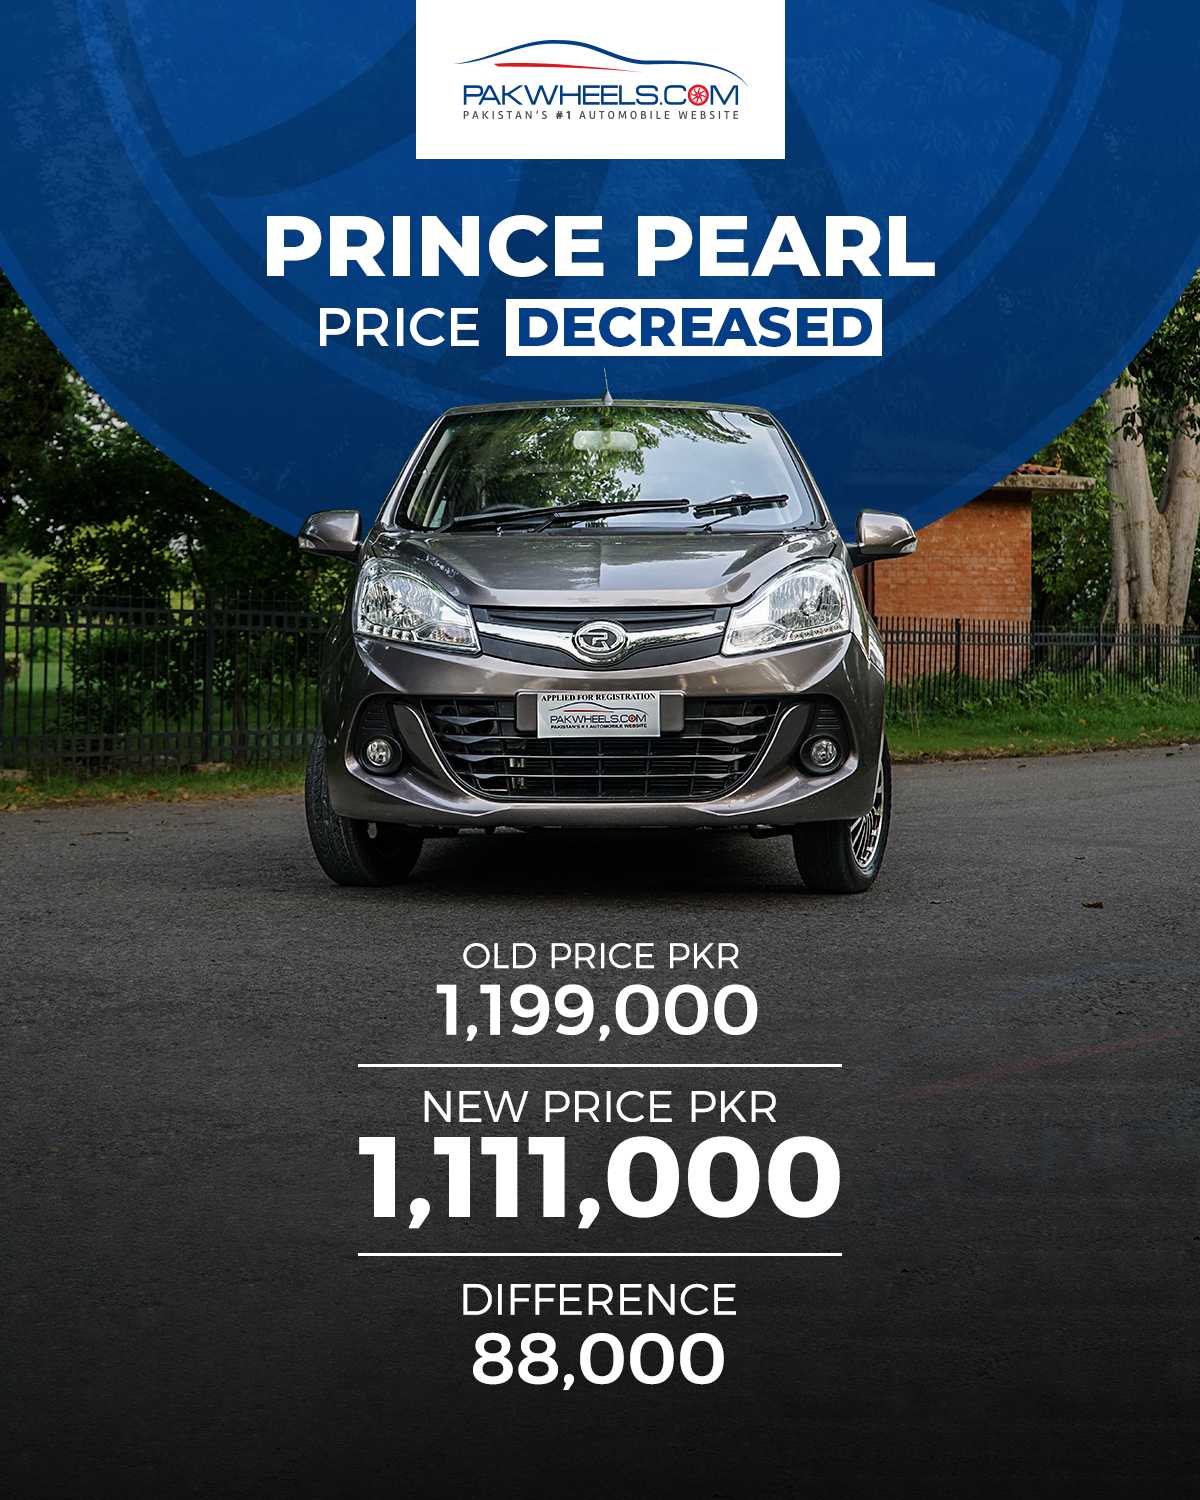 Prince Pearl new prices under policy